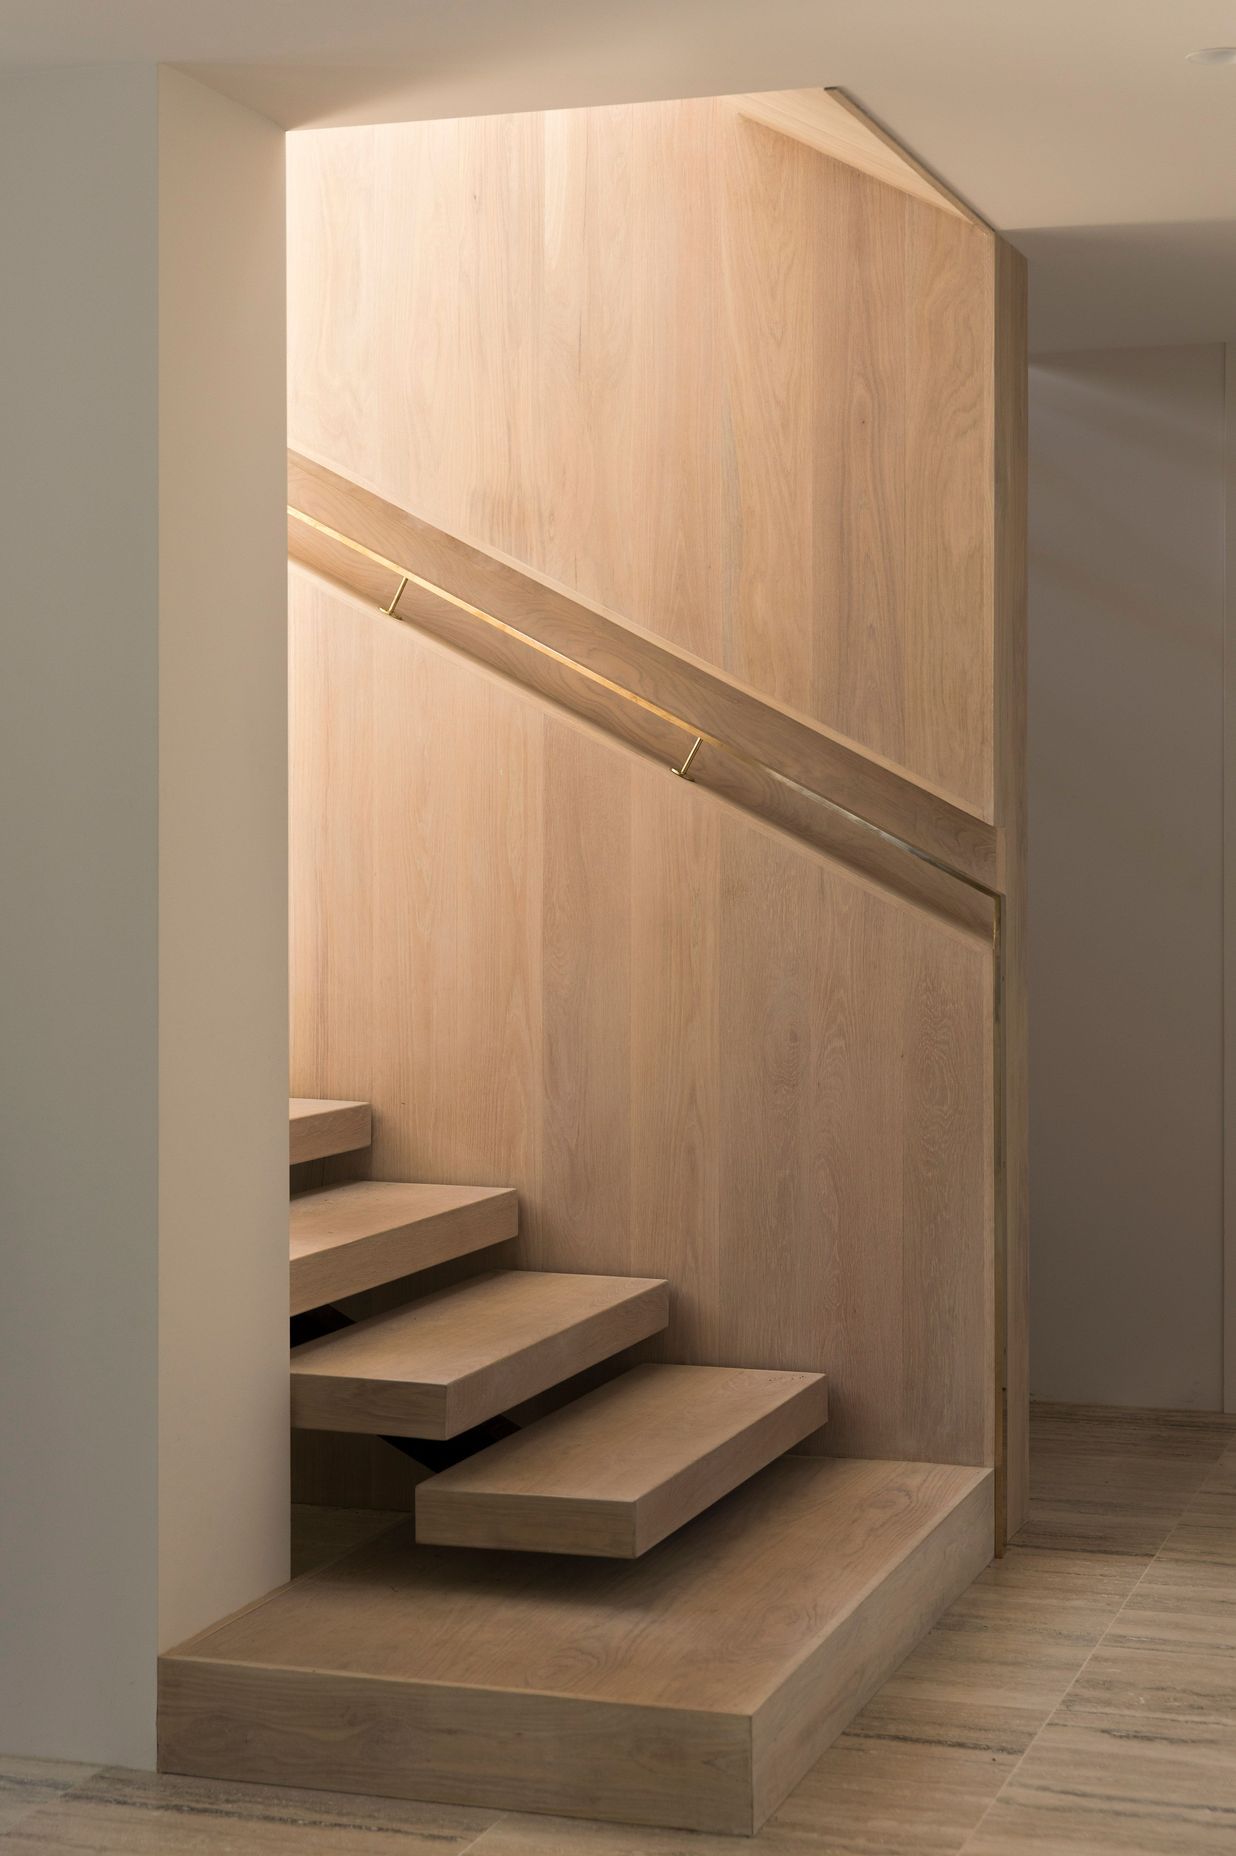 The staircase up to the first-floor living space and bedrooms.